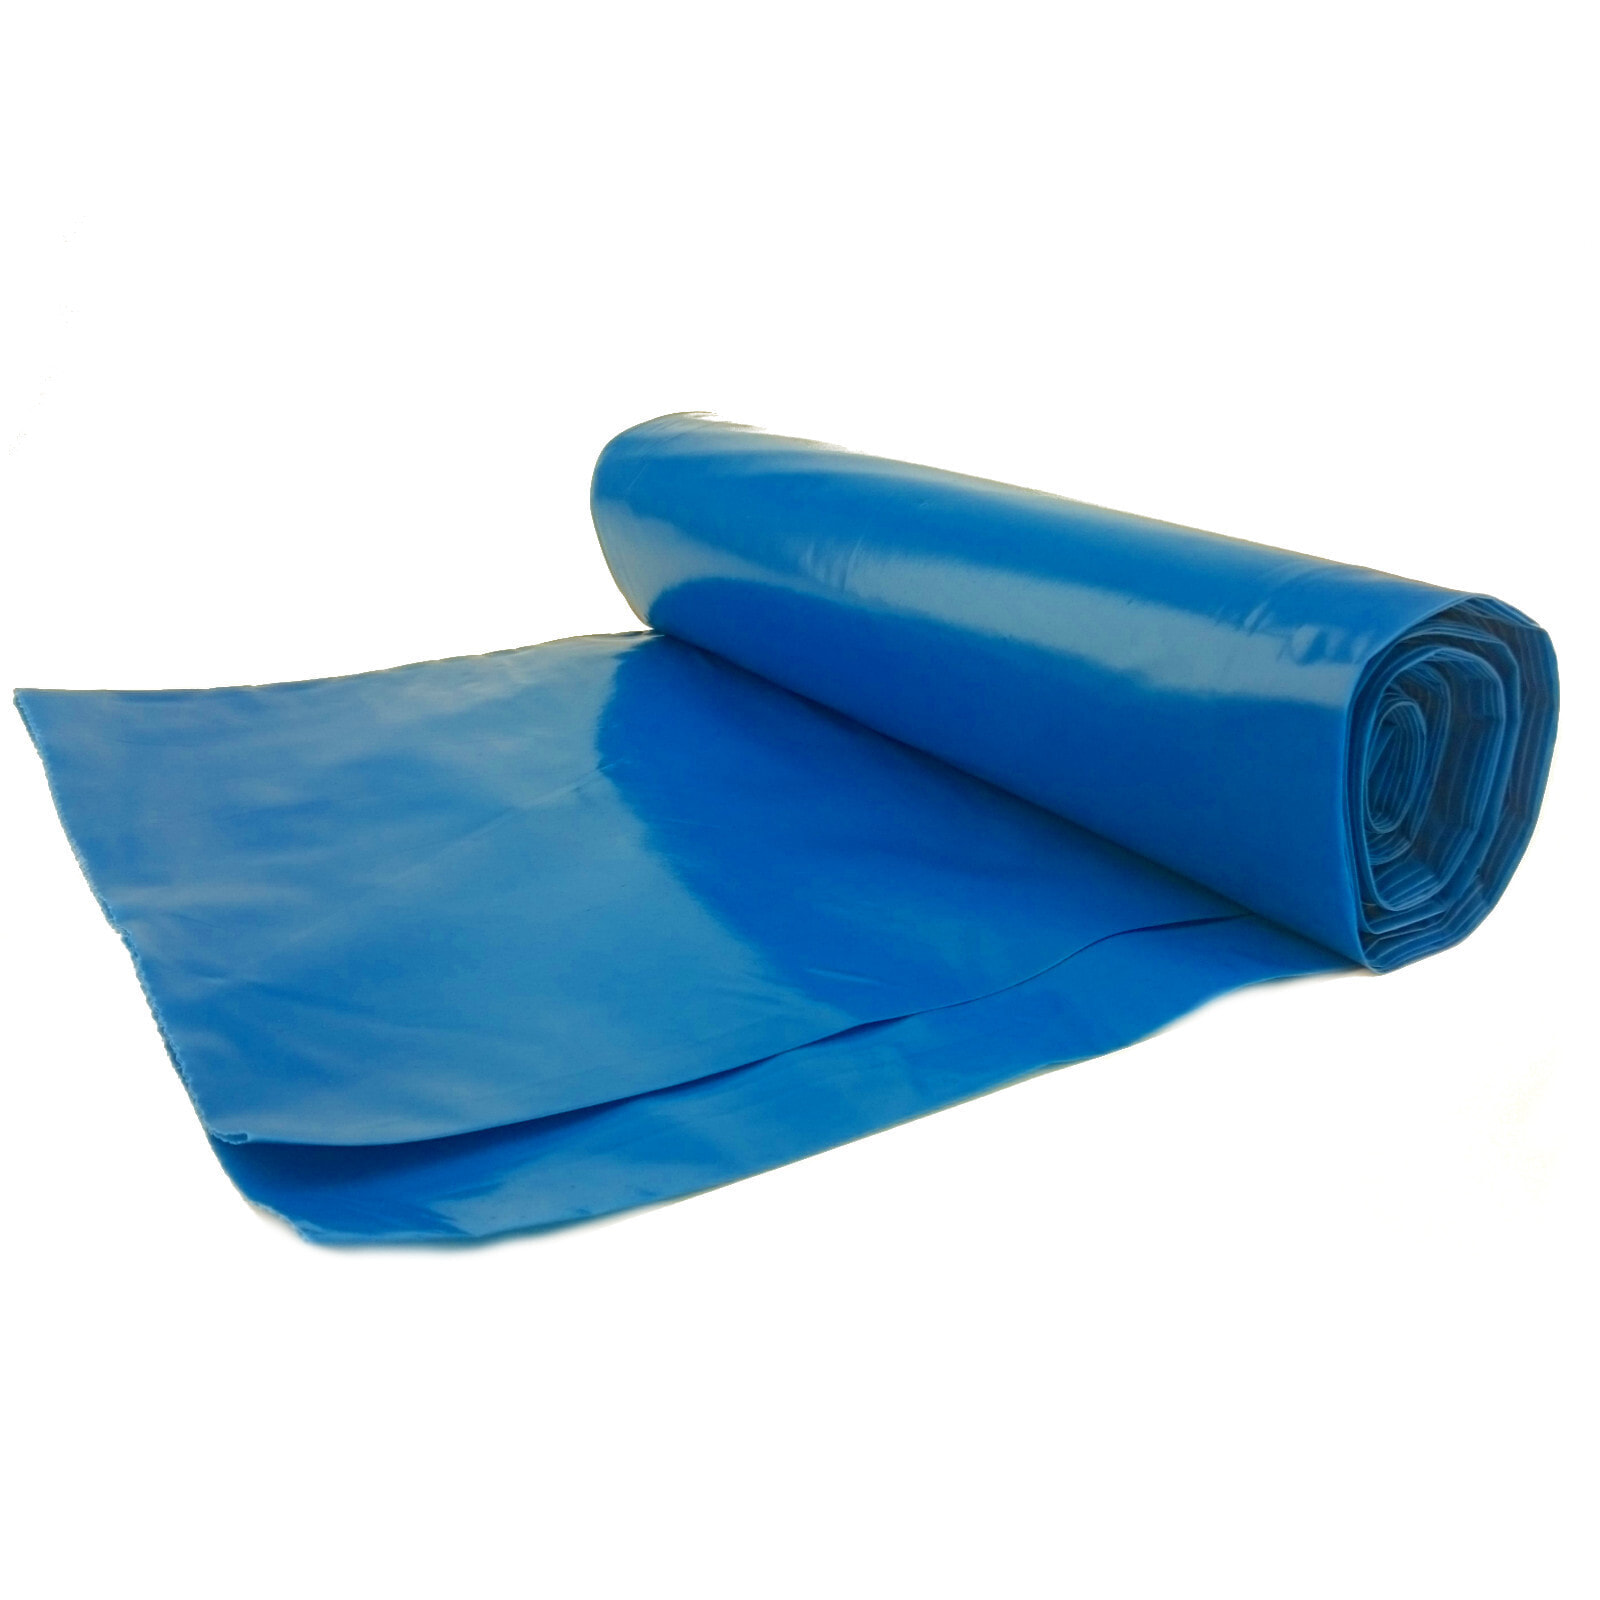 50 micron thick garbage bags. durable roll 25 pcs. - blue 120L